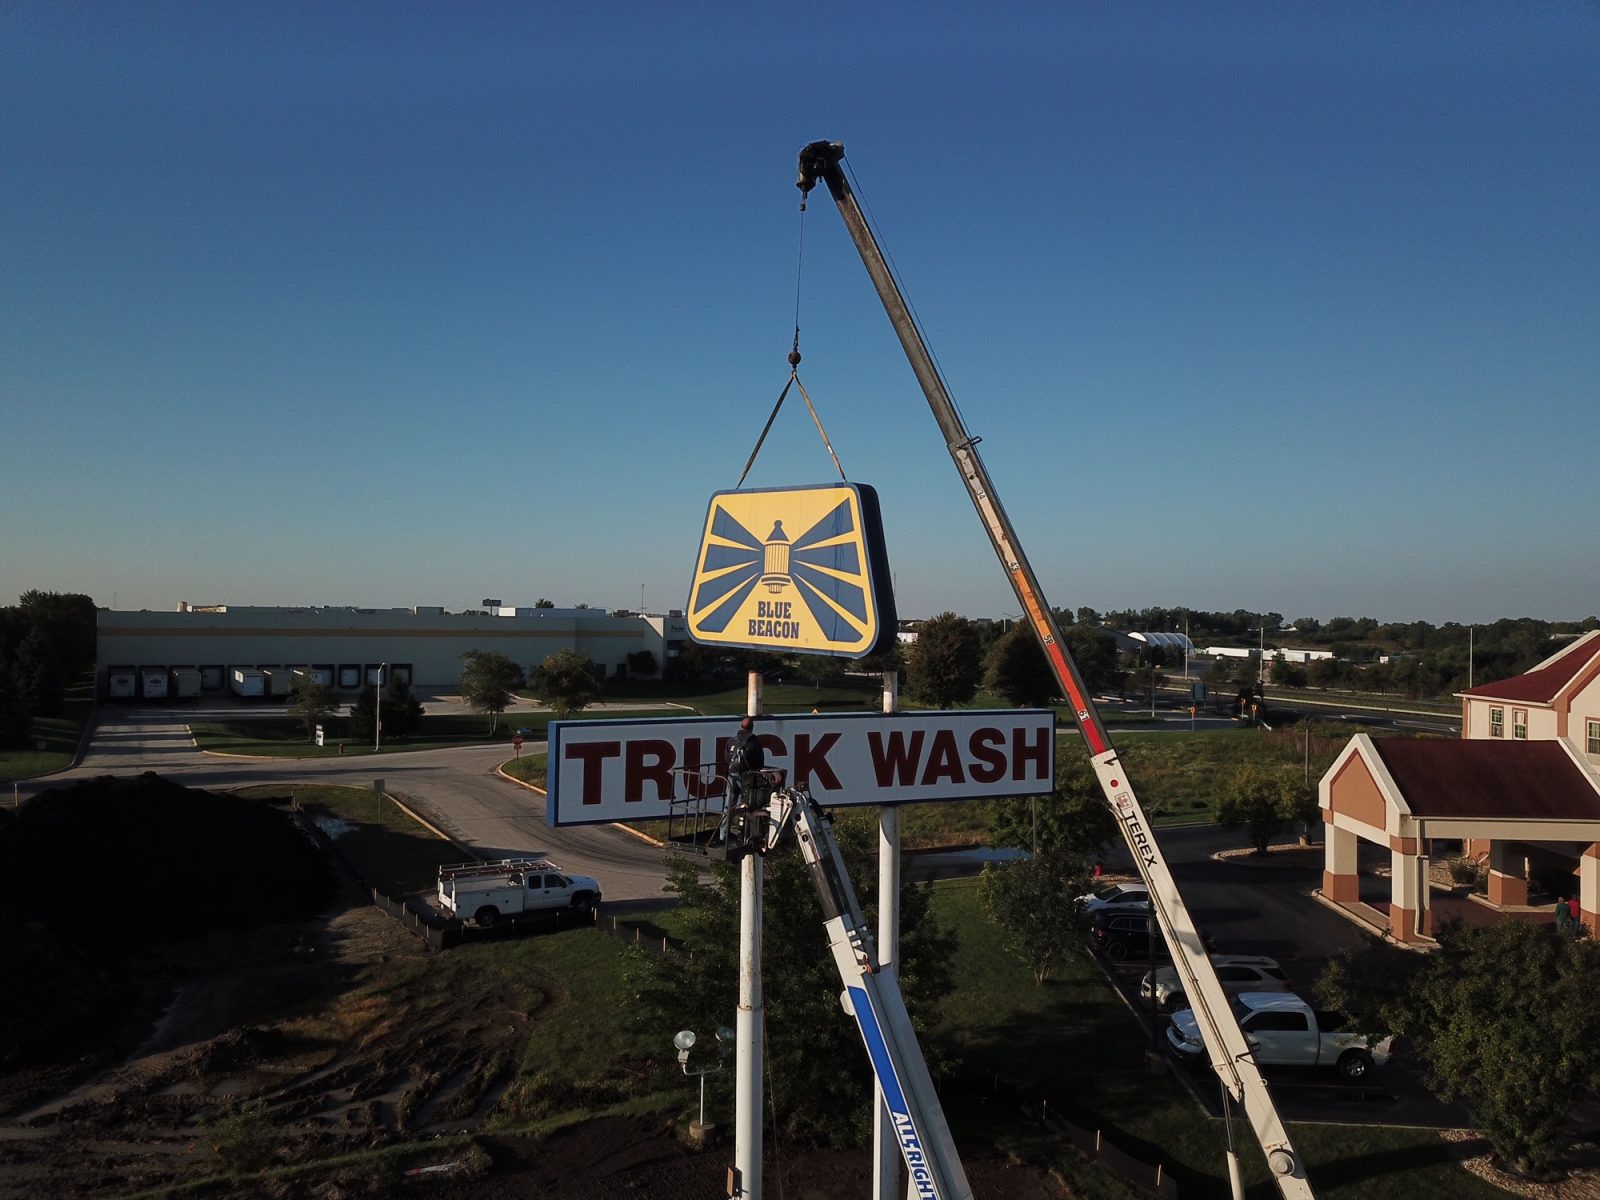 A crane from the Orland Park Sign Company is lifting a sign that says truck wash.